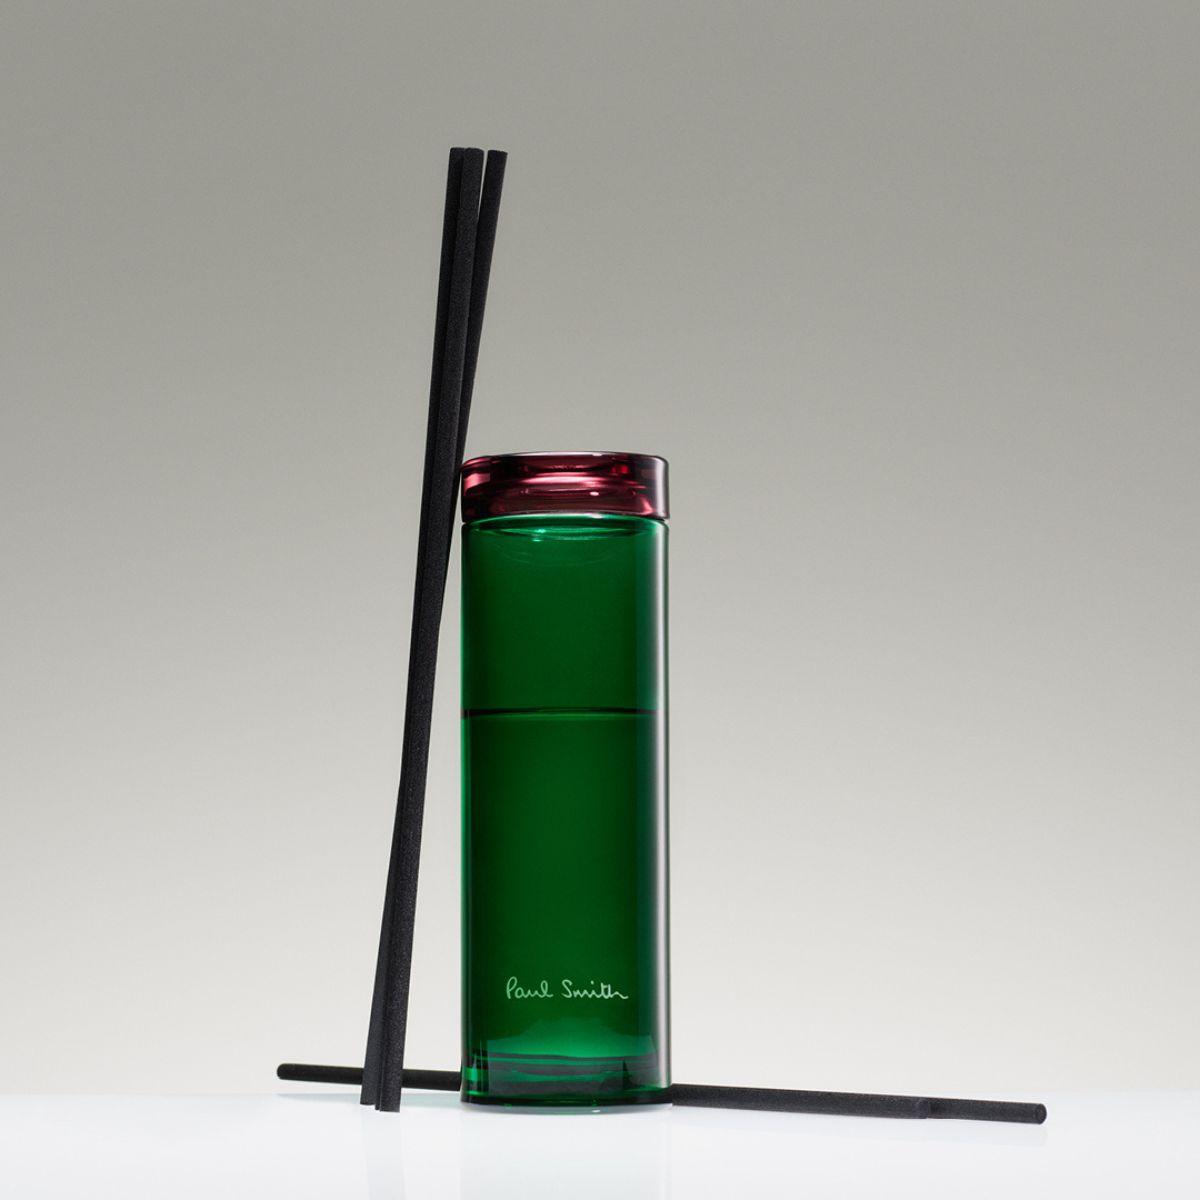 Image of Botanist reed diffuser by Paul Smith